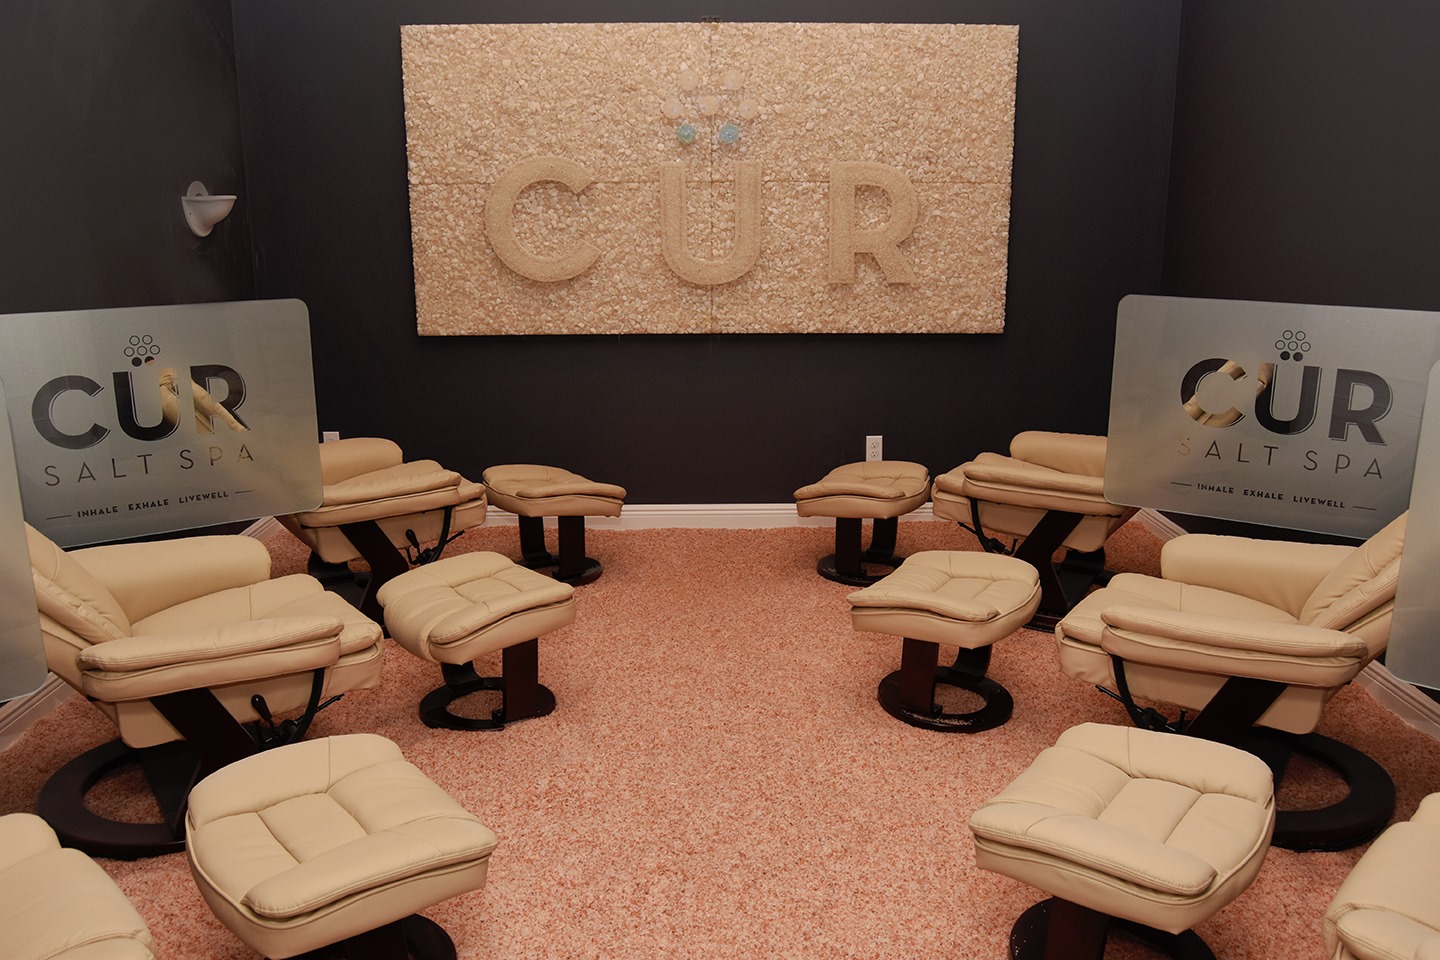 Six Tan Reclined Chairs All With A Foot Rest In A Dark Grey Room With The Cur Salt Spa Logo Personal Dividers And A Rectangular Salt Wall With The Cur Logo At The Cur Salt Spa Stuart Florida.